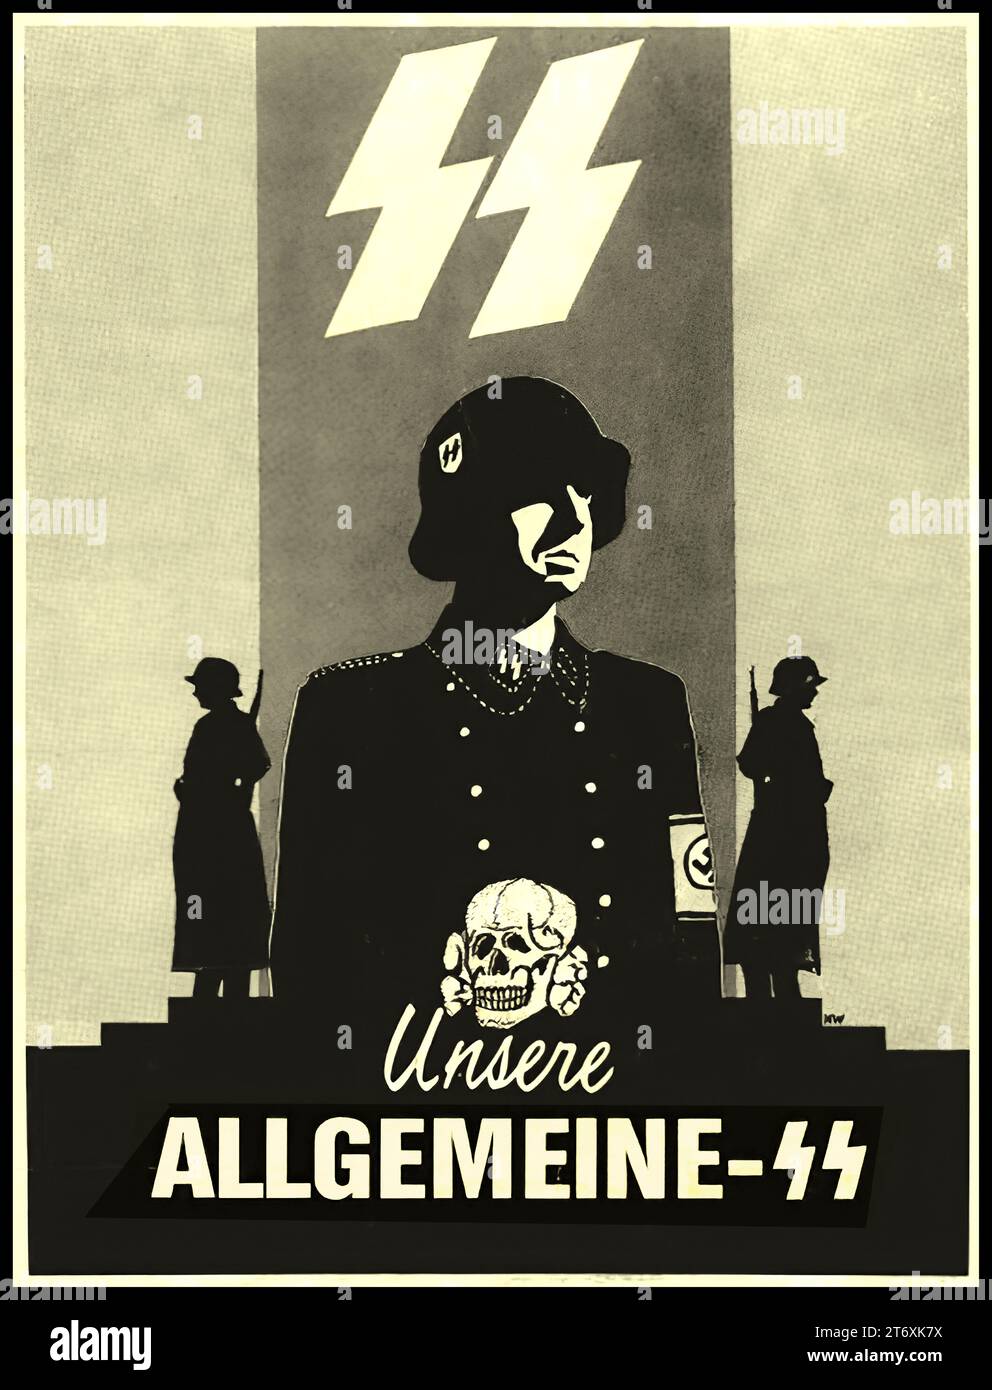 Nazi Waffen SS Propaganda Poster captioned 'OUR GENERAL' (Unsere ALLGEMEINE) with troops dressed in Nazi Waffen SS uniforms standing at attention. World War II Second World War WW2 Stock Photo